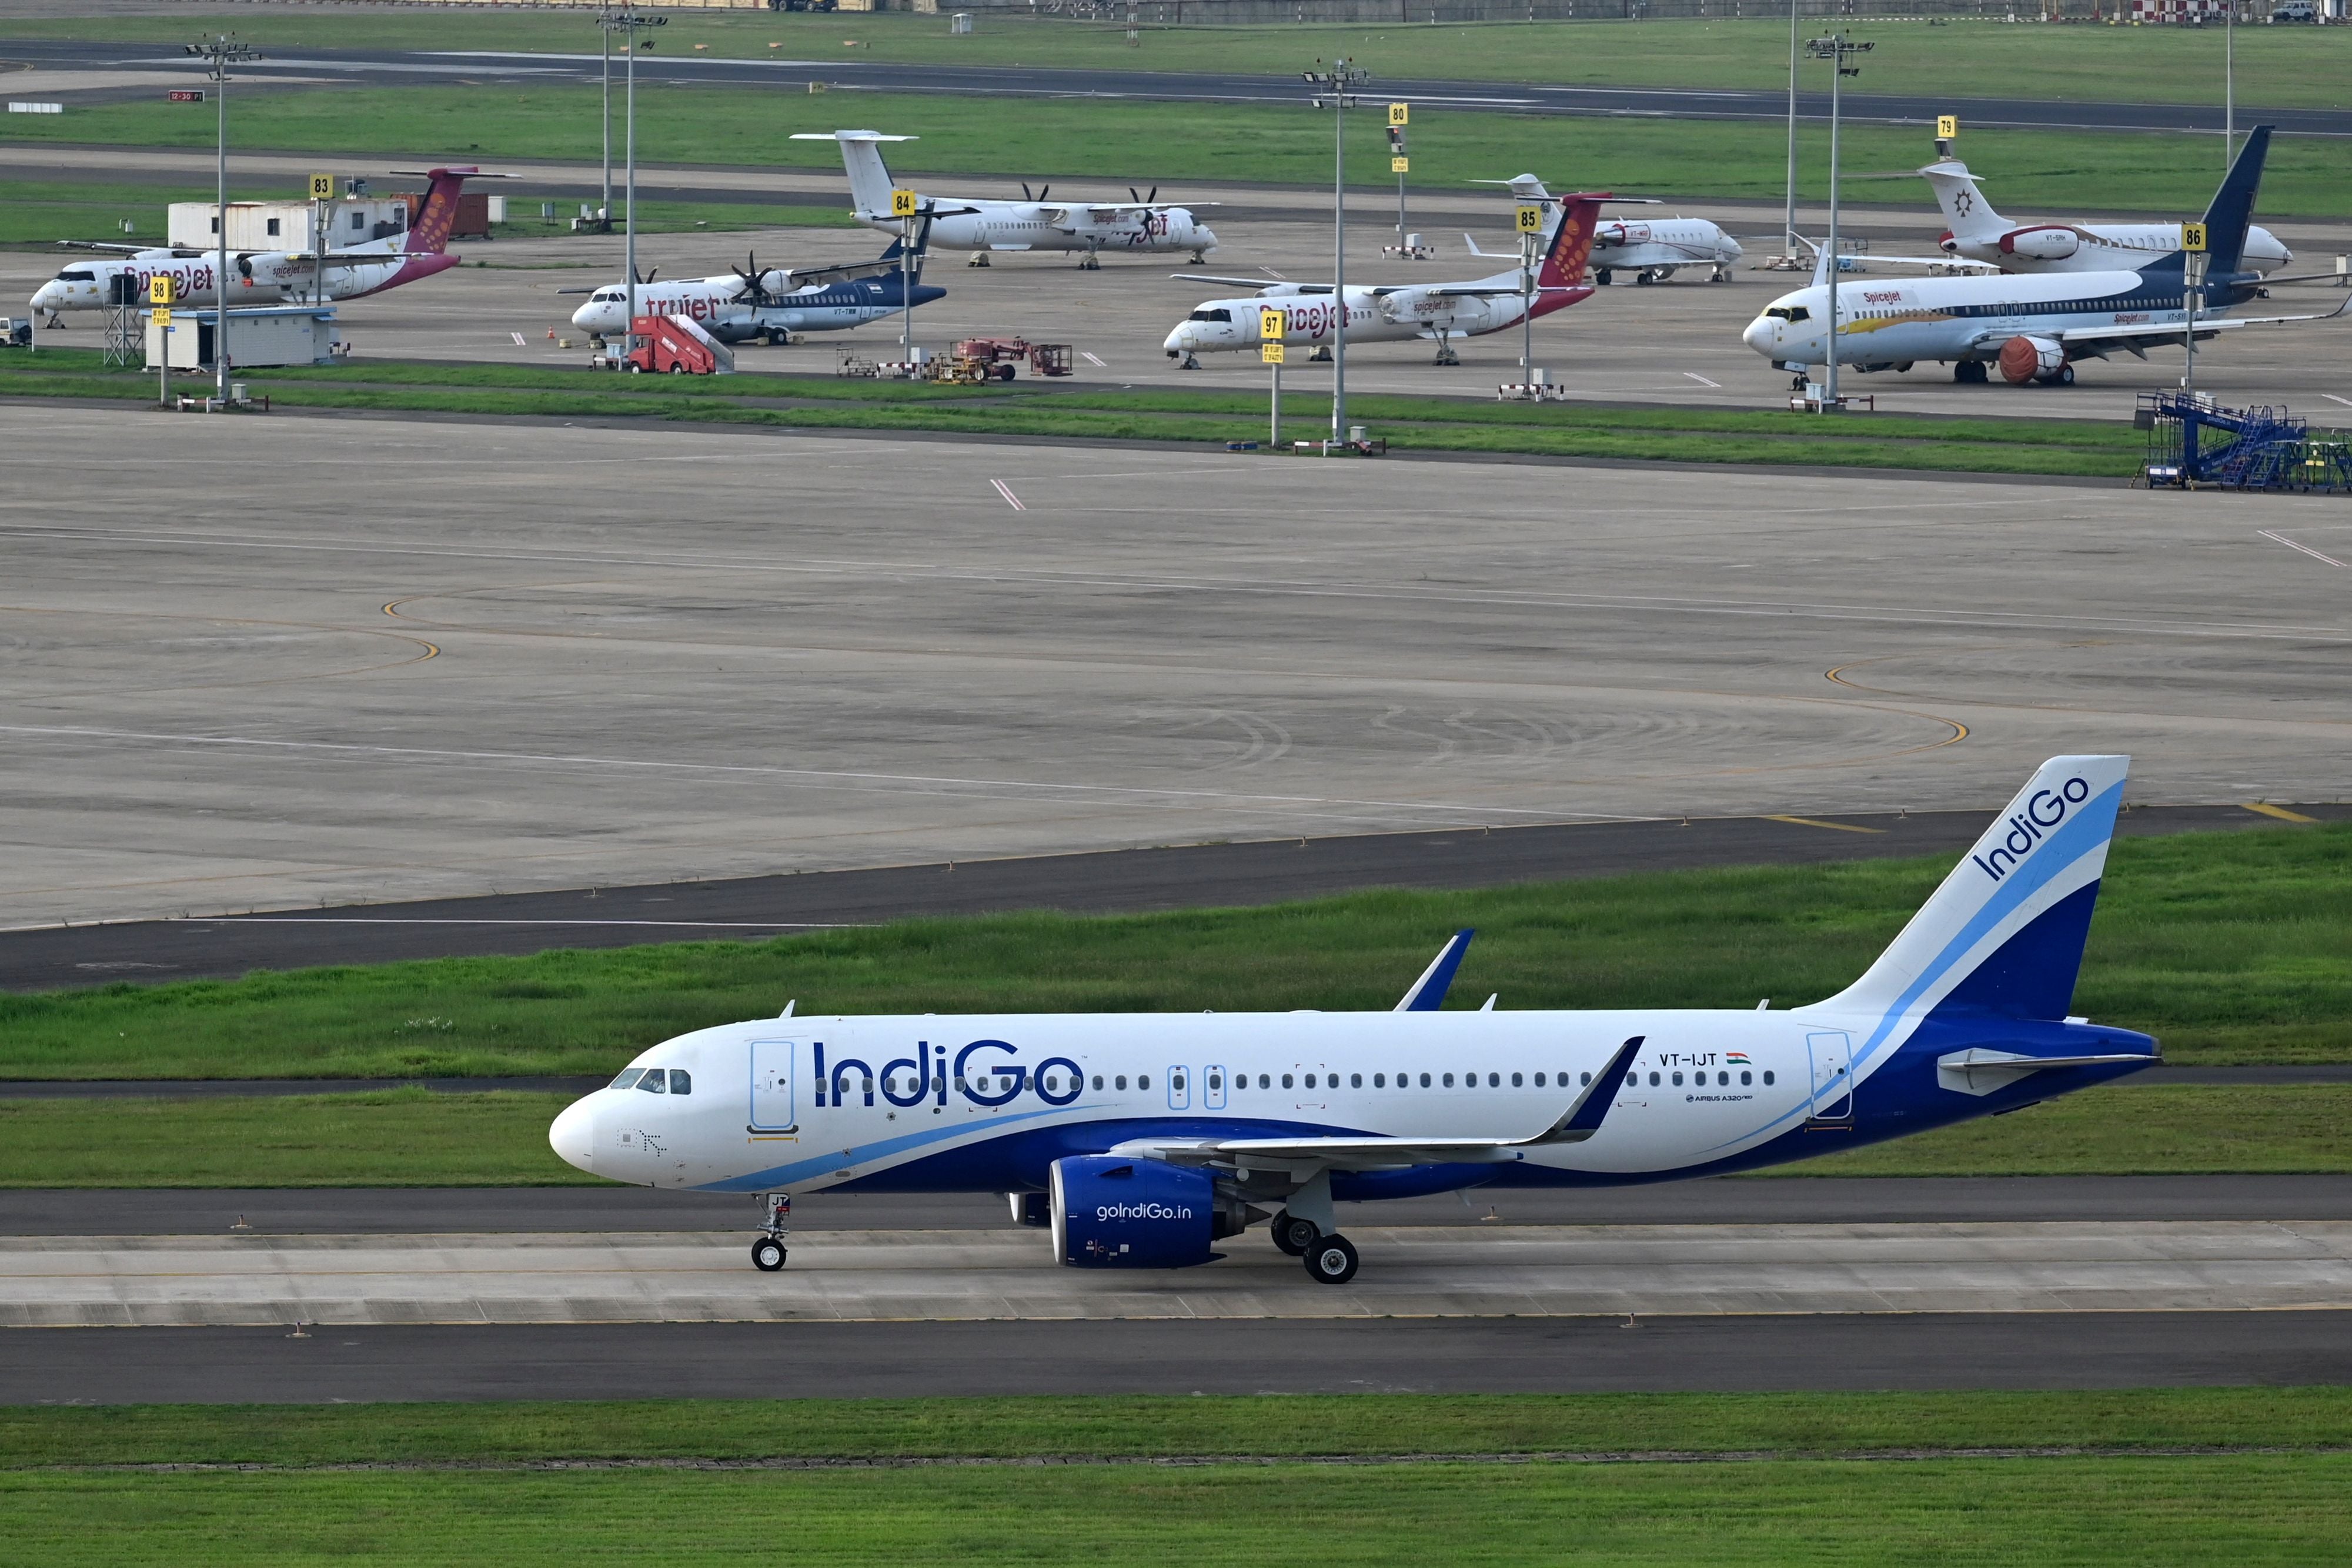 File: An IndiGo Airline passenger aircraft prepares to take-off from the Anna International Airport on the occasion of the International Day of the Air Traffic Controller, in Chennai on 20 October 2022